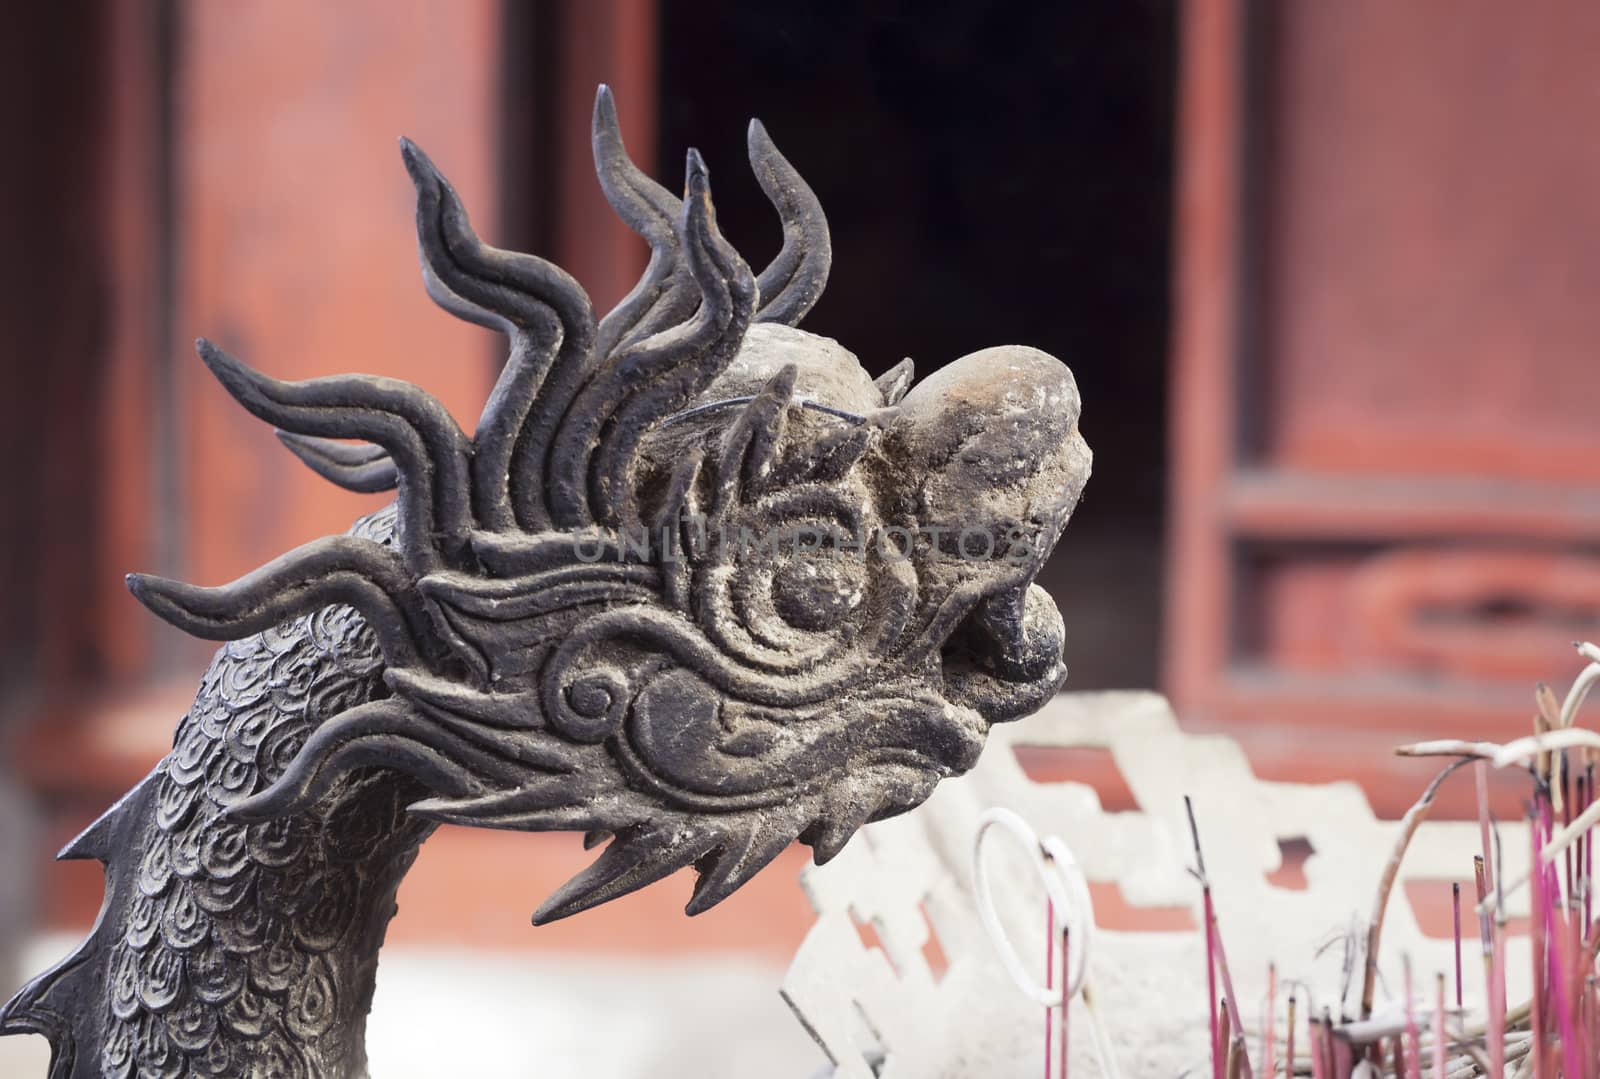 Dragon sculpture in a temple in Hanoi, Vietnam by Goodday